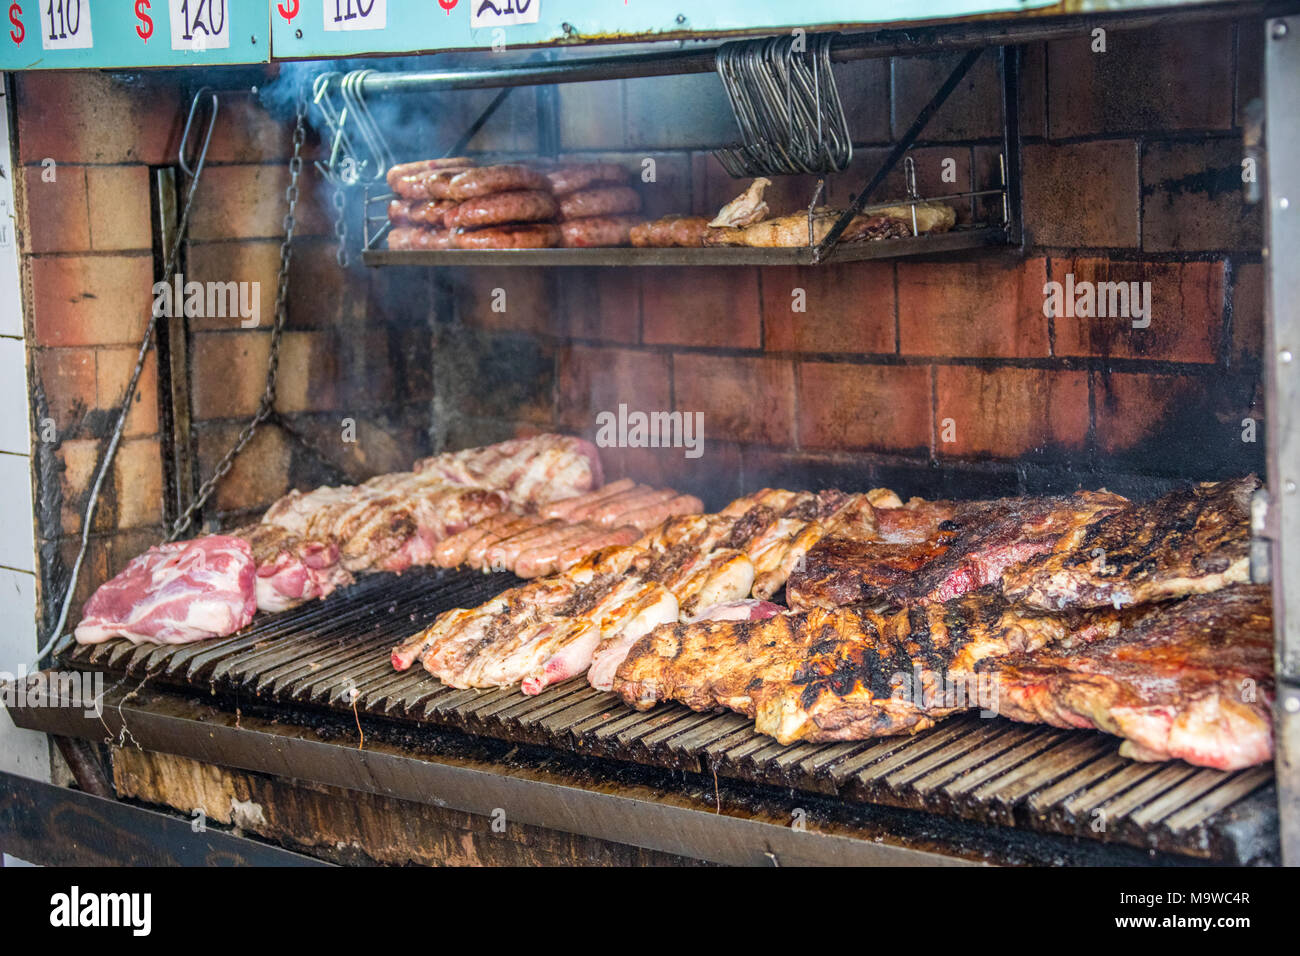 Meat grilling at a parilla restauant in Buenos Aires, Argentina Stock Photo